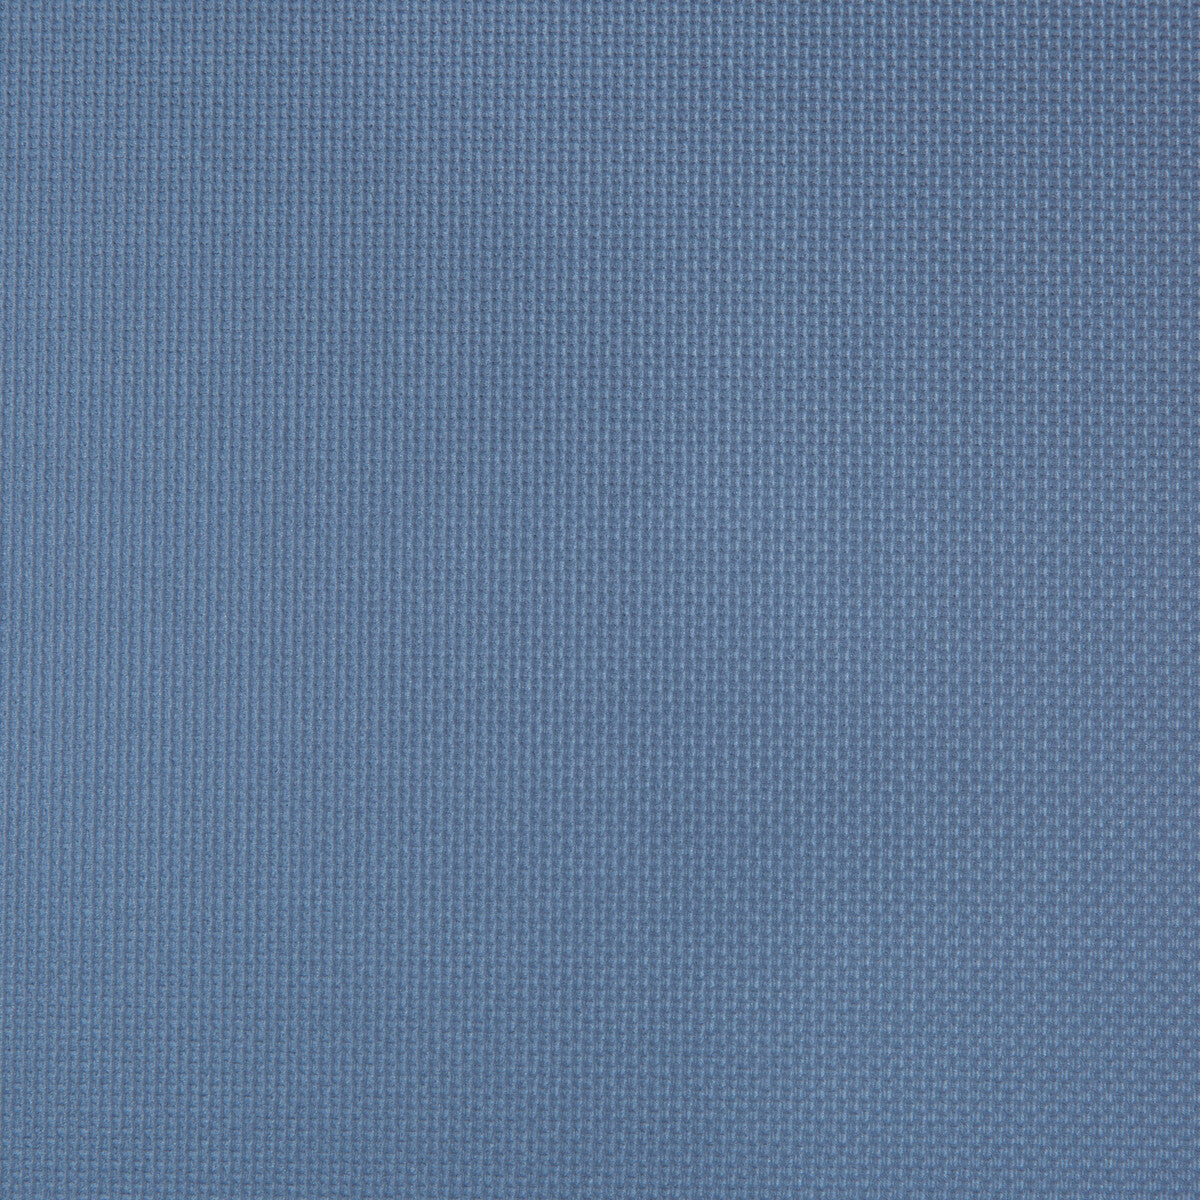 Sidney fabric in blueberry color - pattern SIDNEY.50.0 - by Kravet Contract